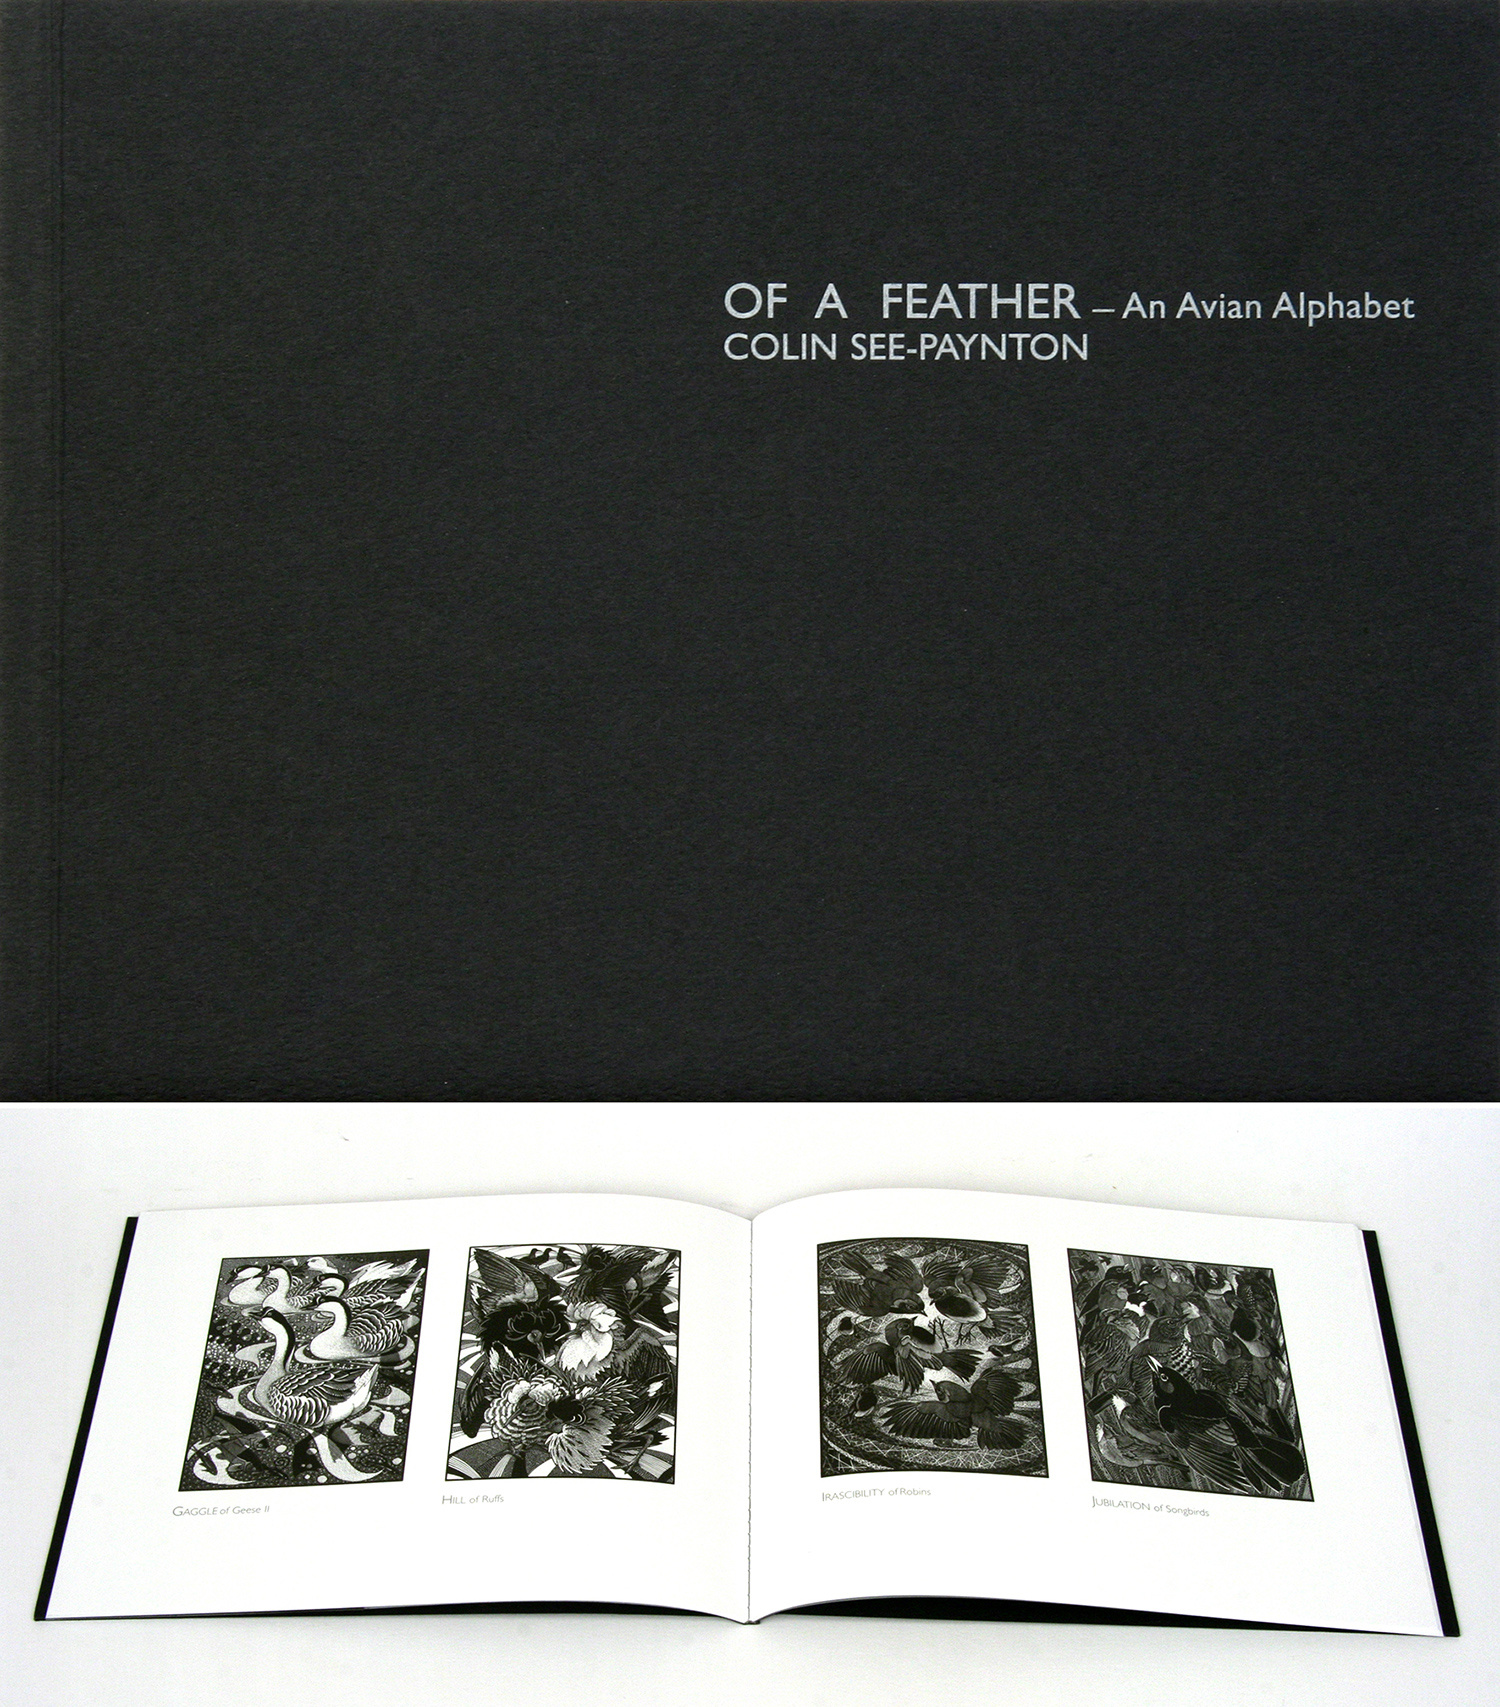 Of a Feather-An Avian Alphabet by Colin See-Paynton